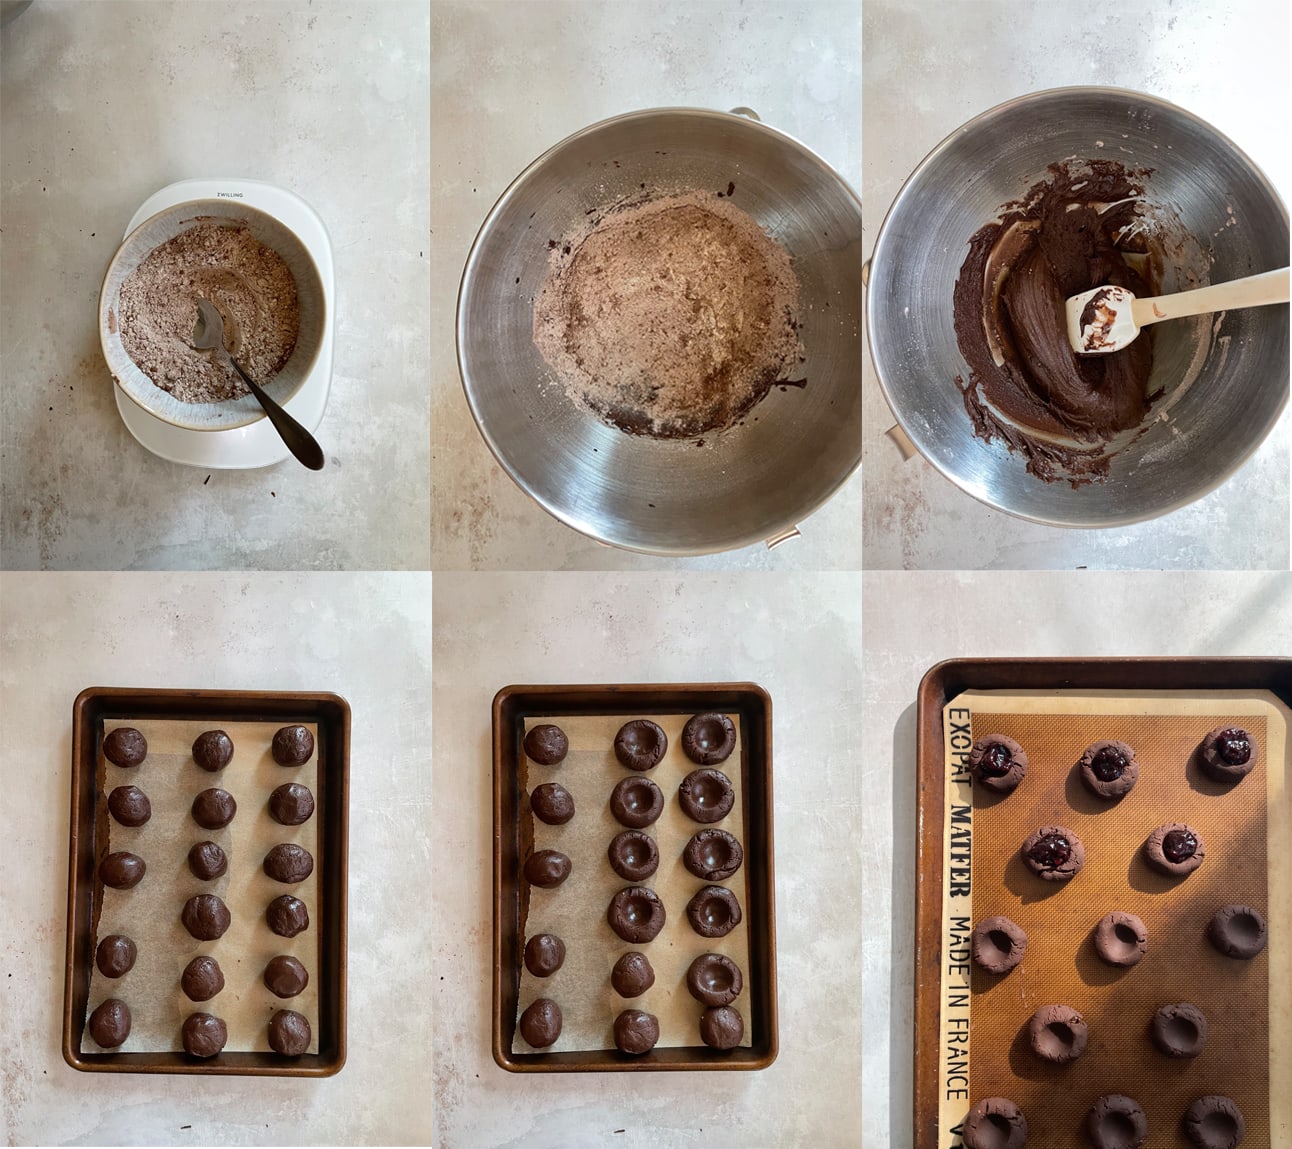 Process images for how to make the cookie dough and shape the chocolate cherry cookies.